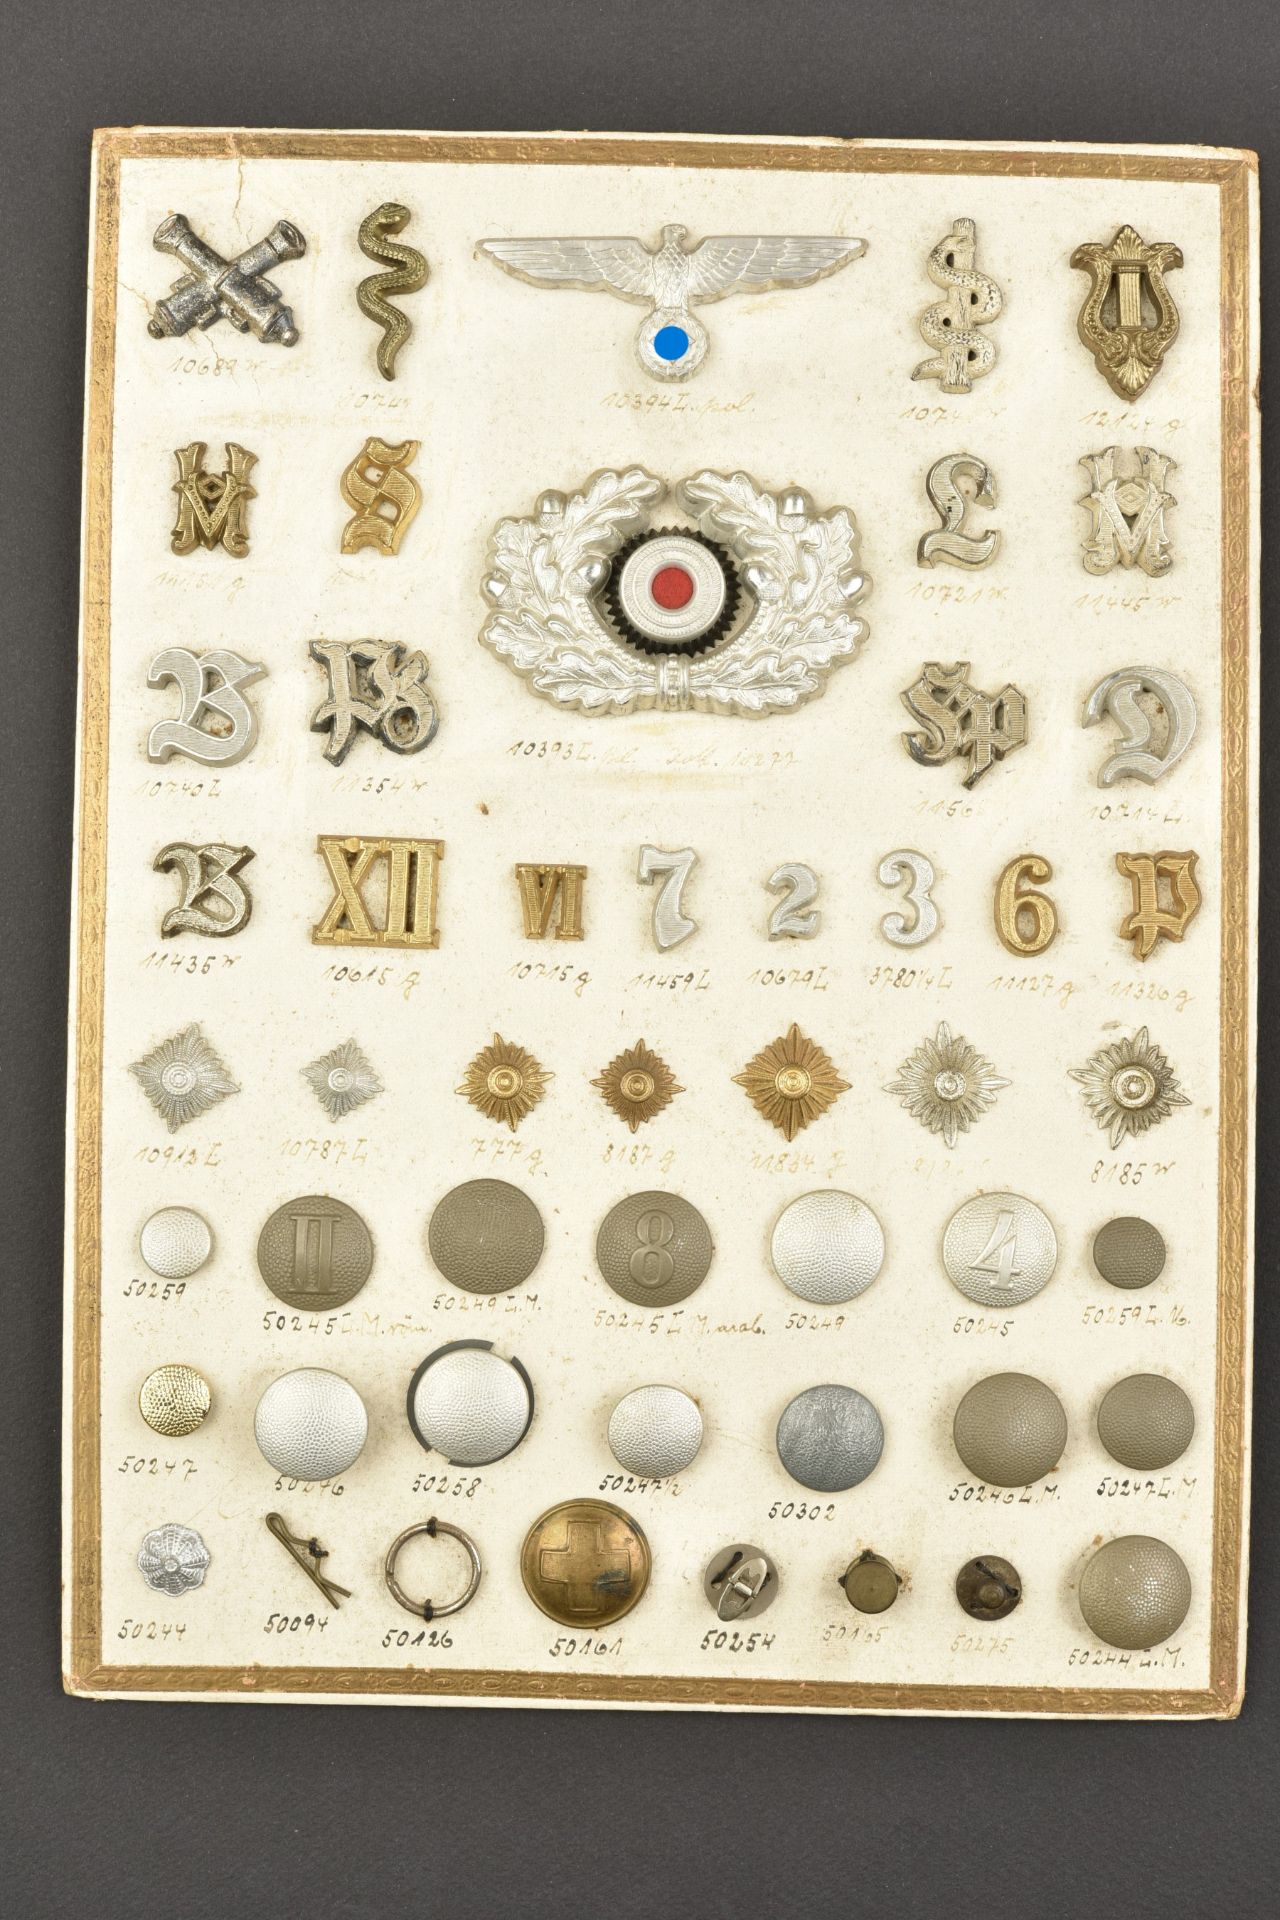 Plateau d'insignes et boutons. Tray of badges and buttons.